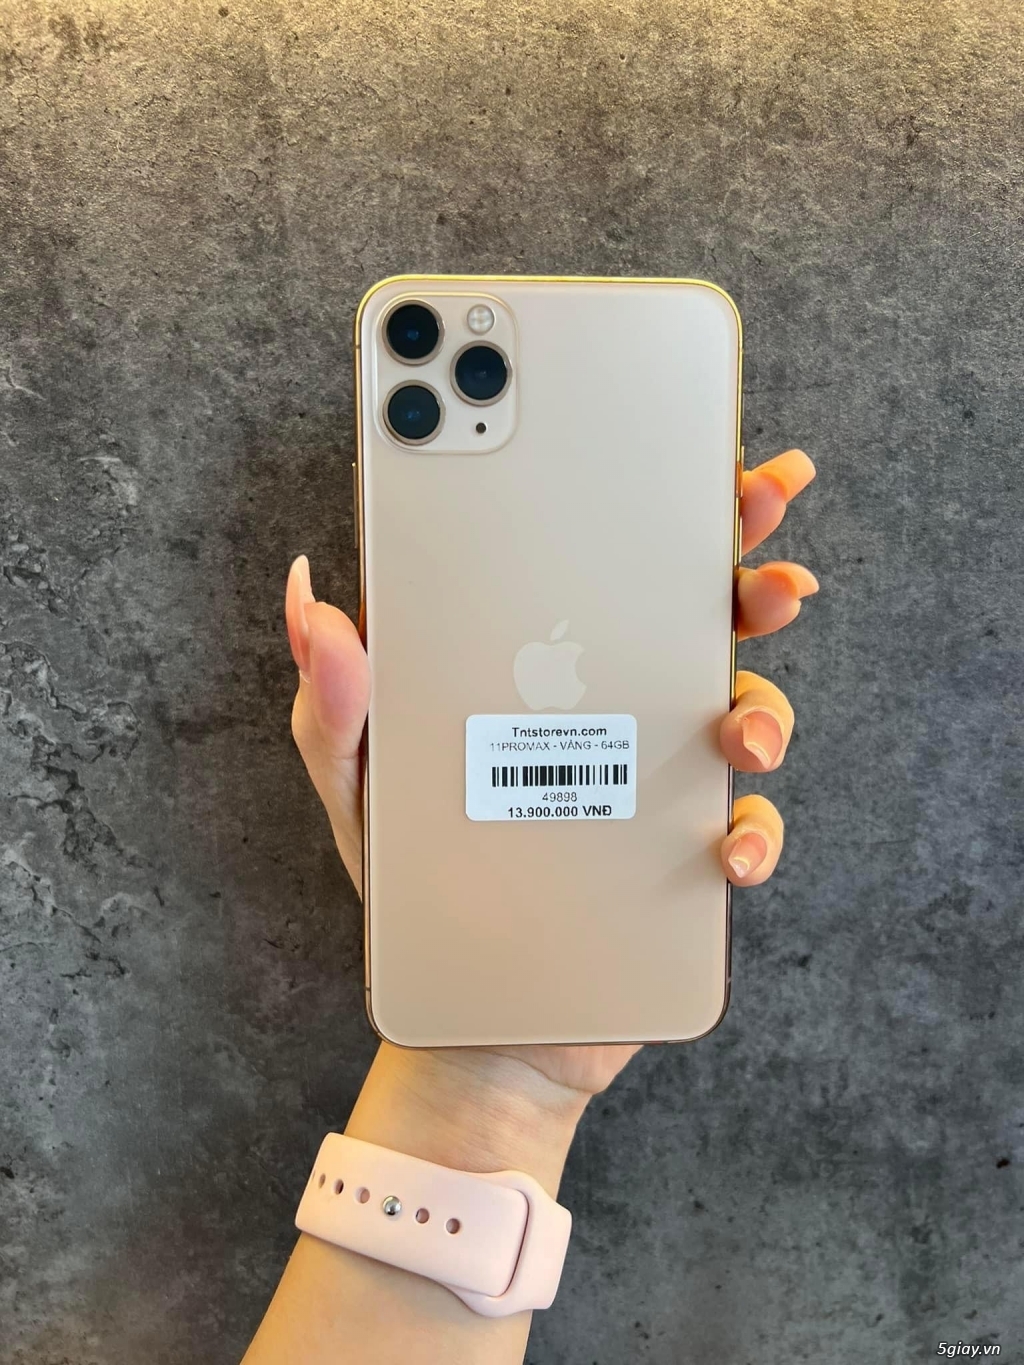 Iphone 11promax 64G Gold giá tốt 5giay.vn - 2